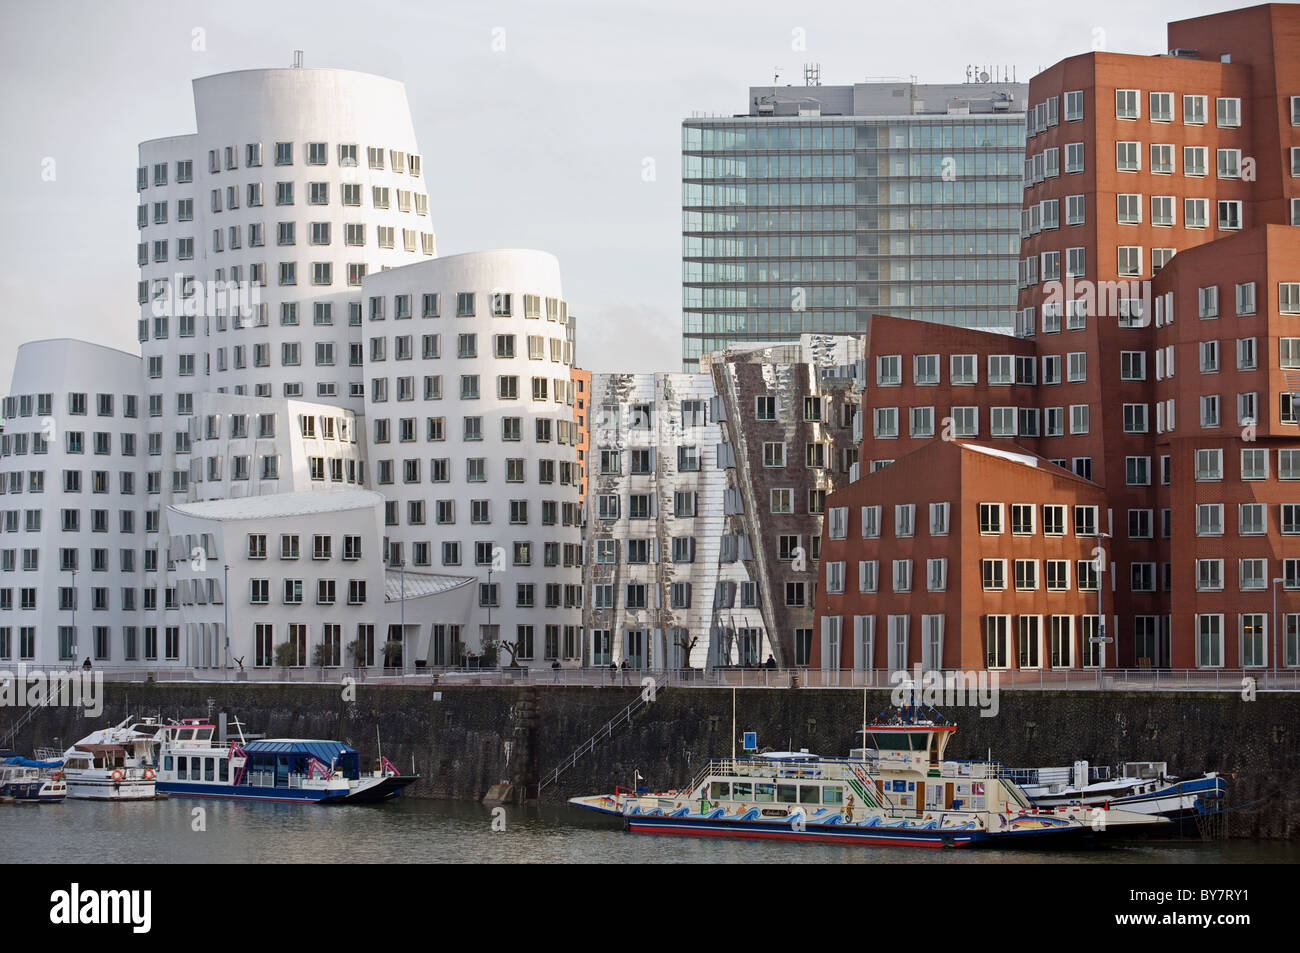 Gehry-Bauten buildings with the City Gate office building in background, Dusseldorf, Germany. Stock Photo